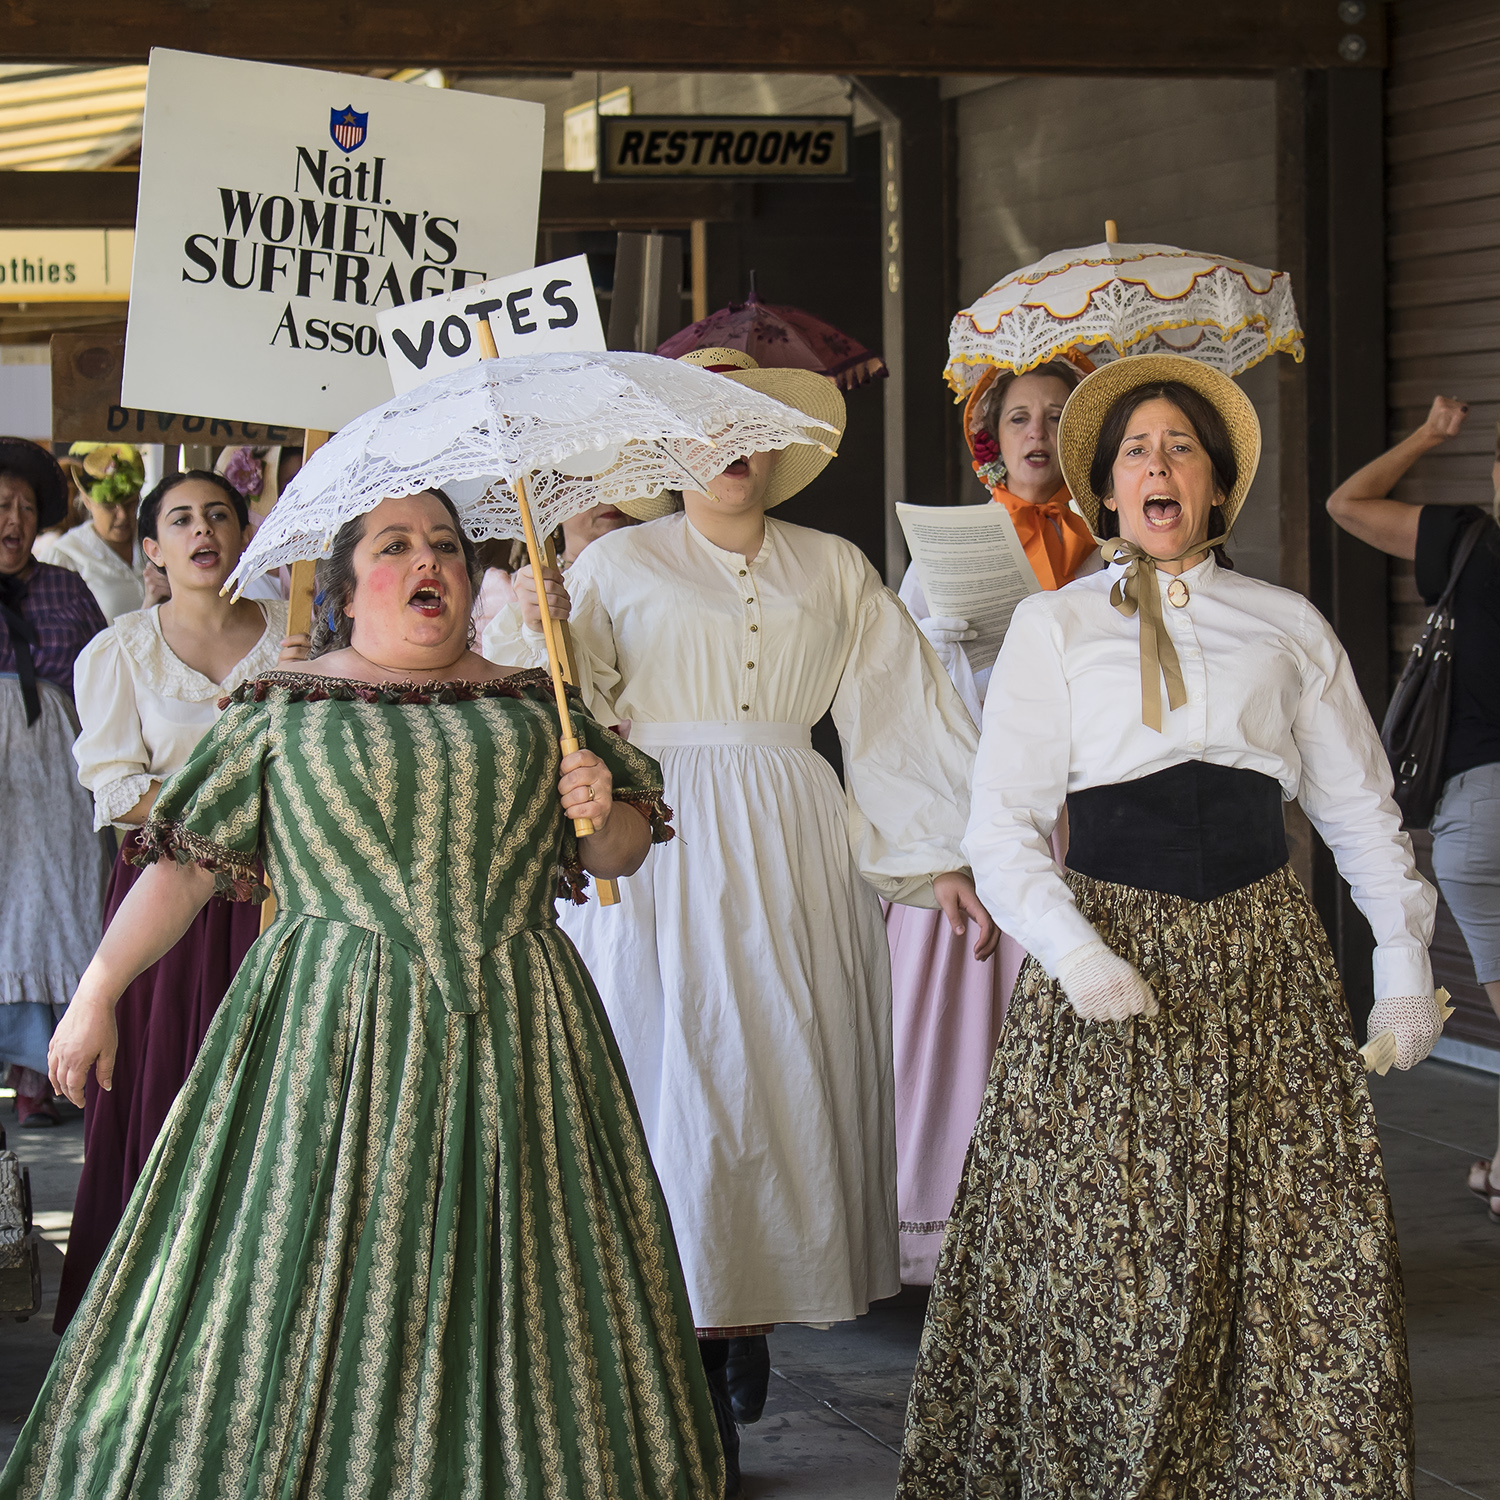 Old Town: The Suffragettes, 5